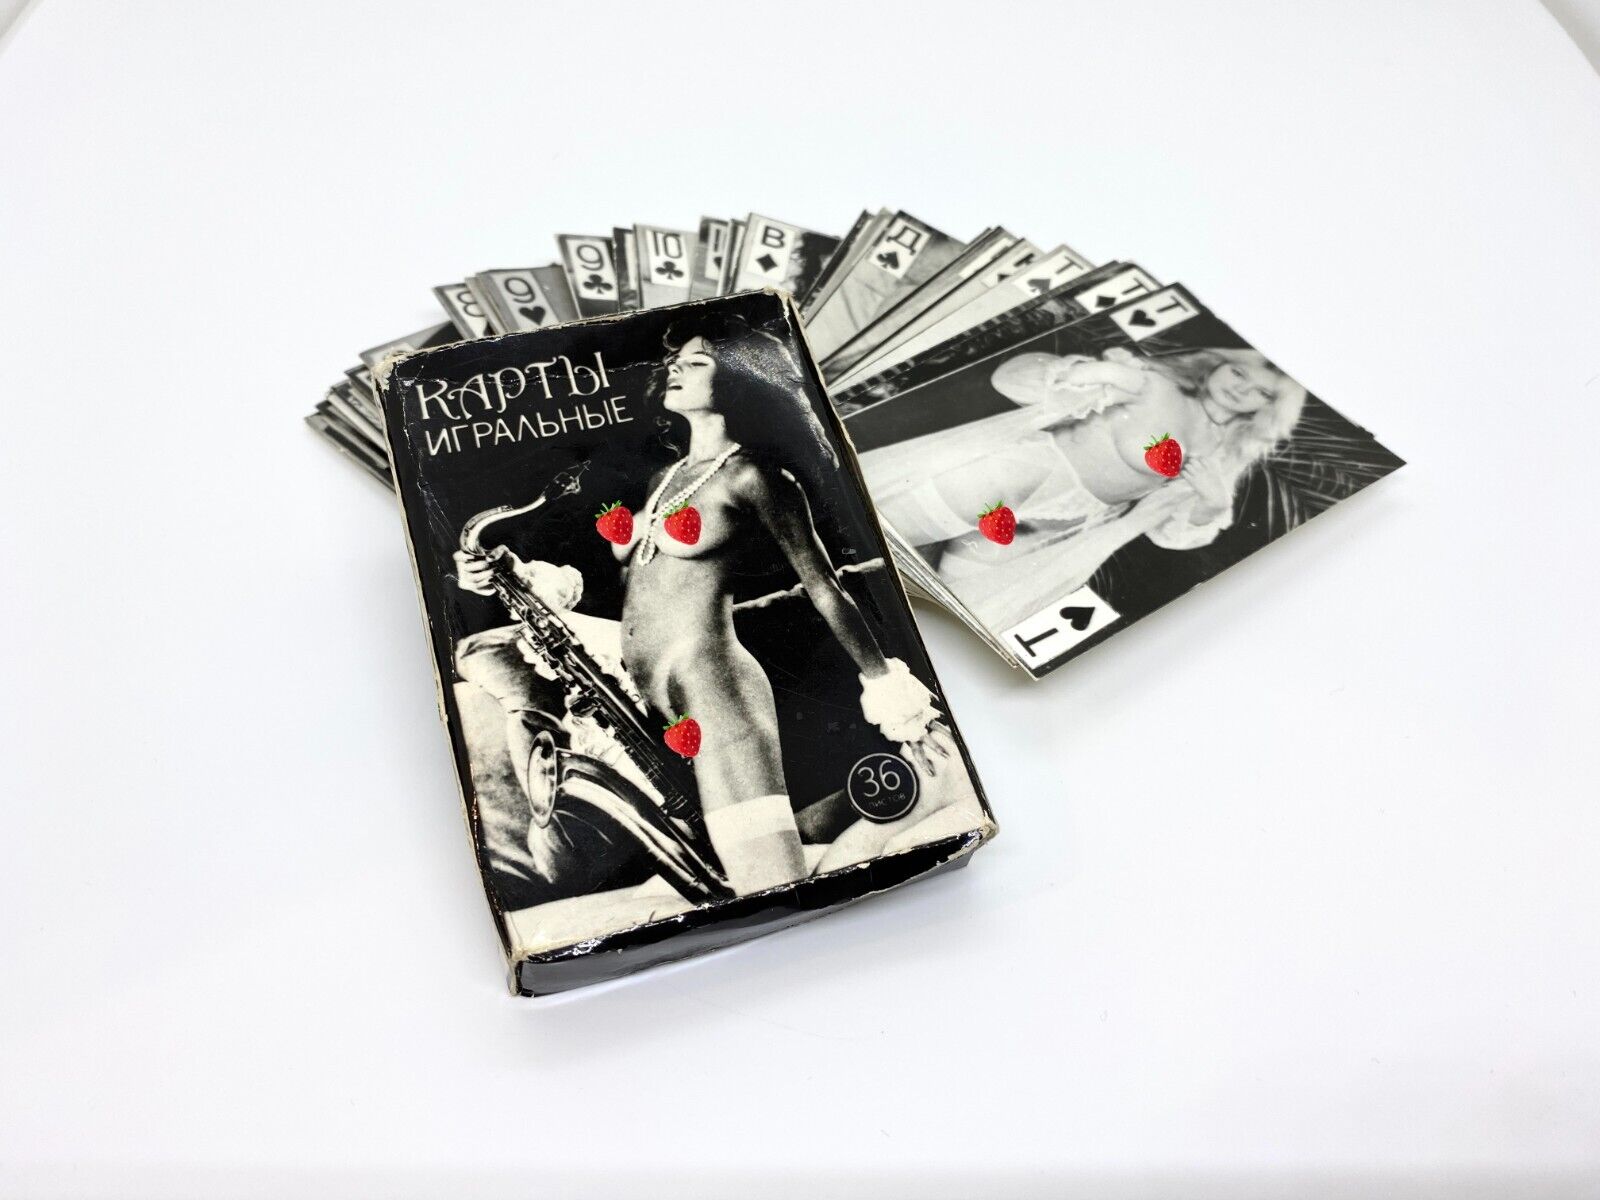 Erotic playing cards, naked women. Very old. Models. Vintage full deck 36 pcs